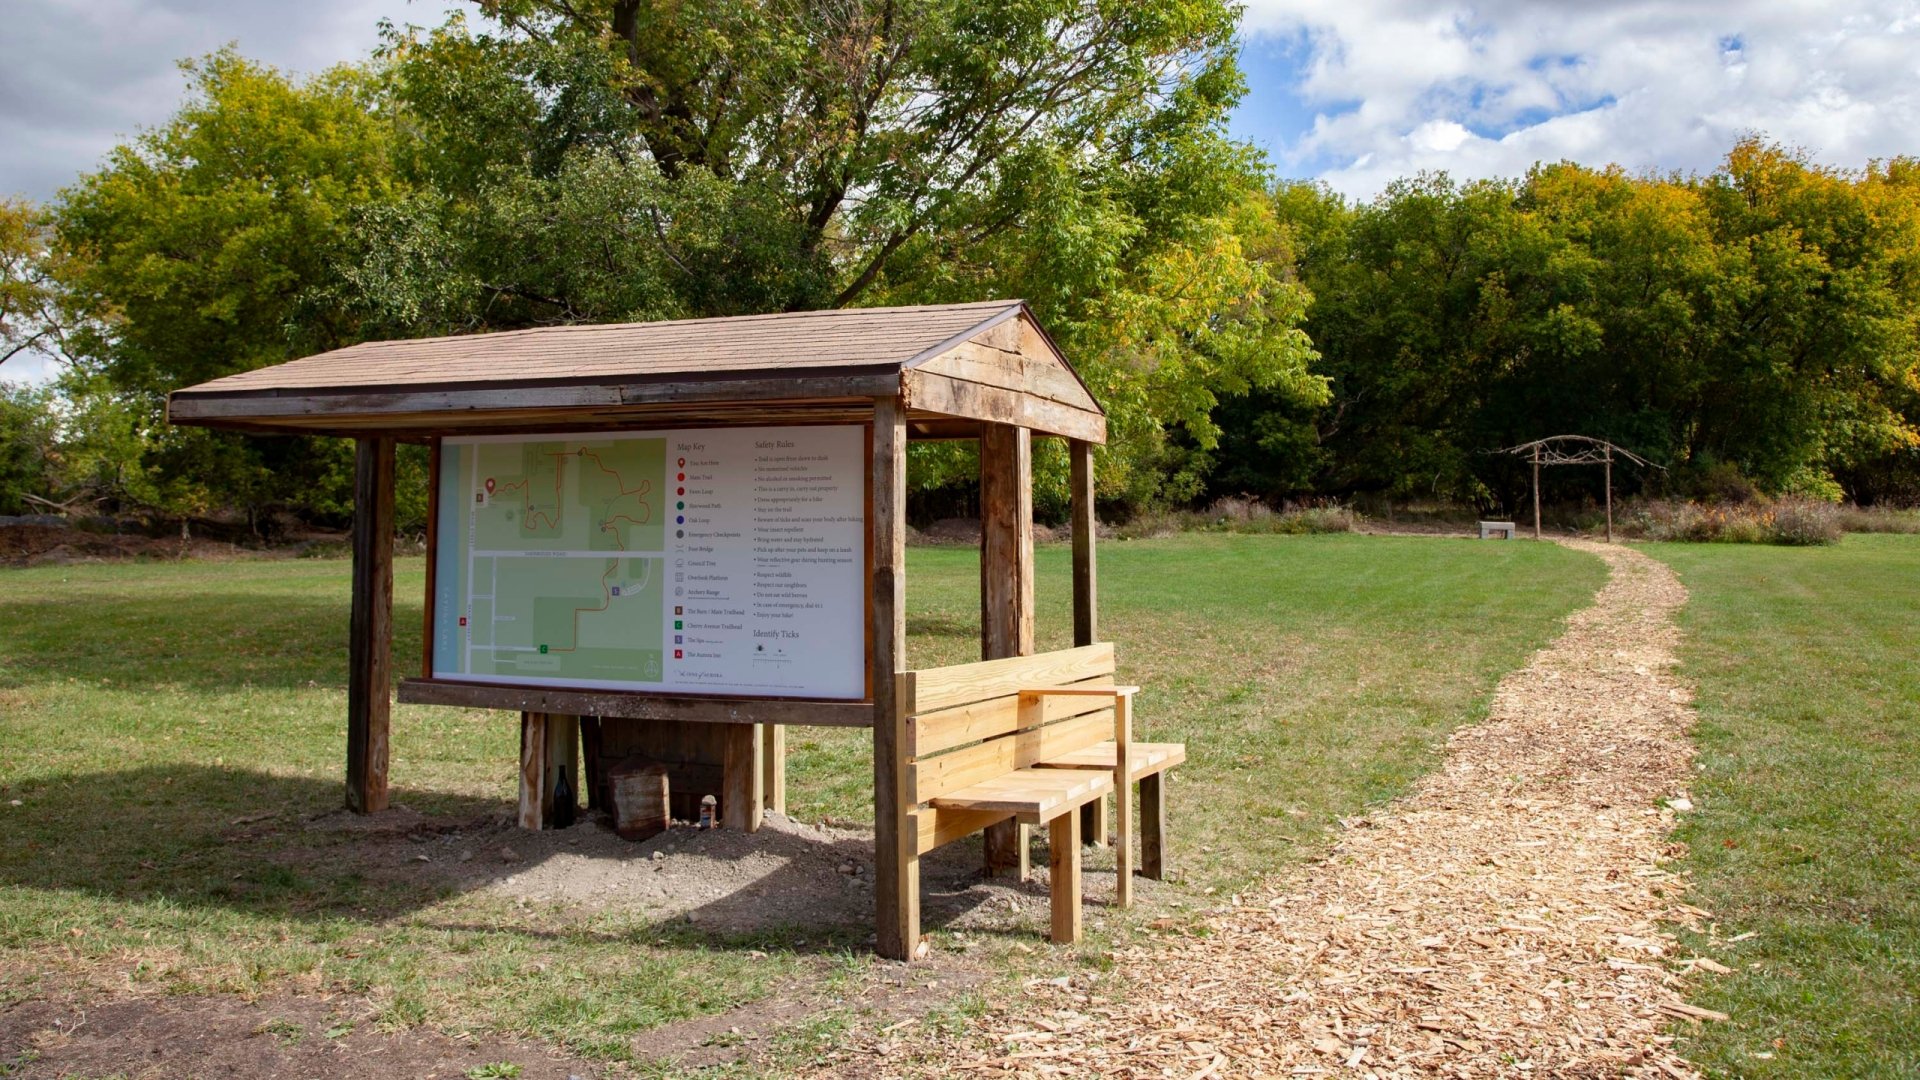 A wooden shelter with a bench and map of nature trails.